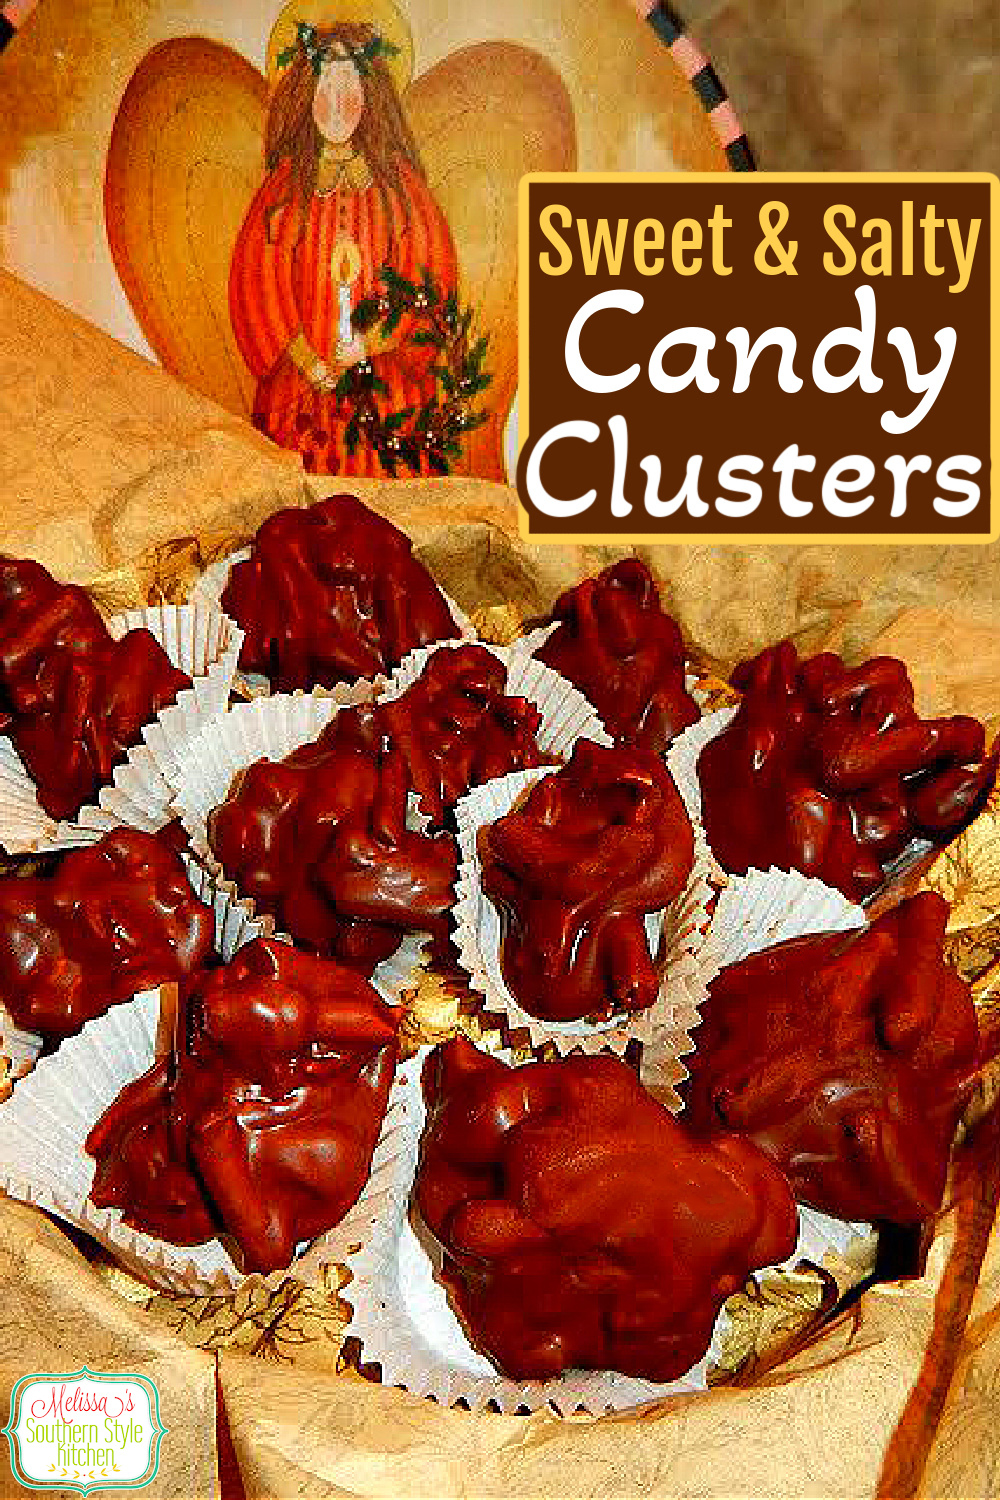 These Sweet And Salty Candy Clusters are oh-so-simple to make and come together in no time flat #candyrecipes #sweetandsaltycandy #pretzelclusters #holidayrecipes #candy #chocolate #fruitandnutcandy via @melissasssk